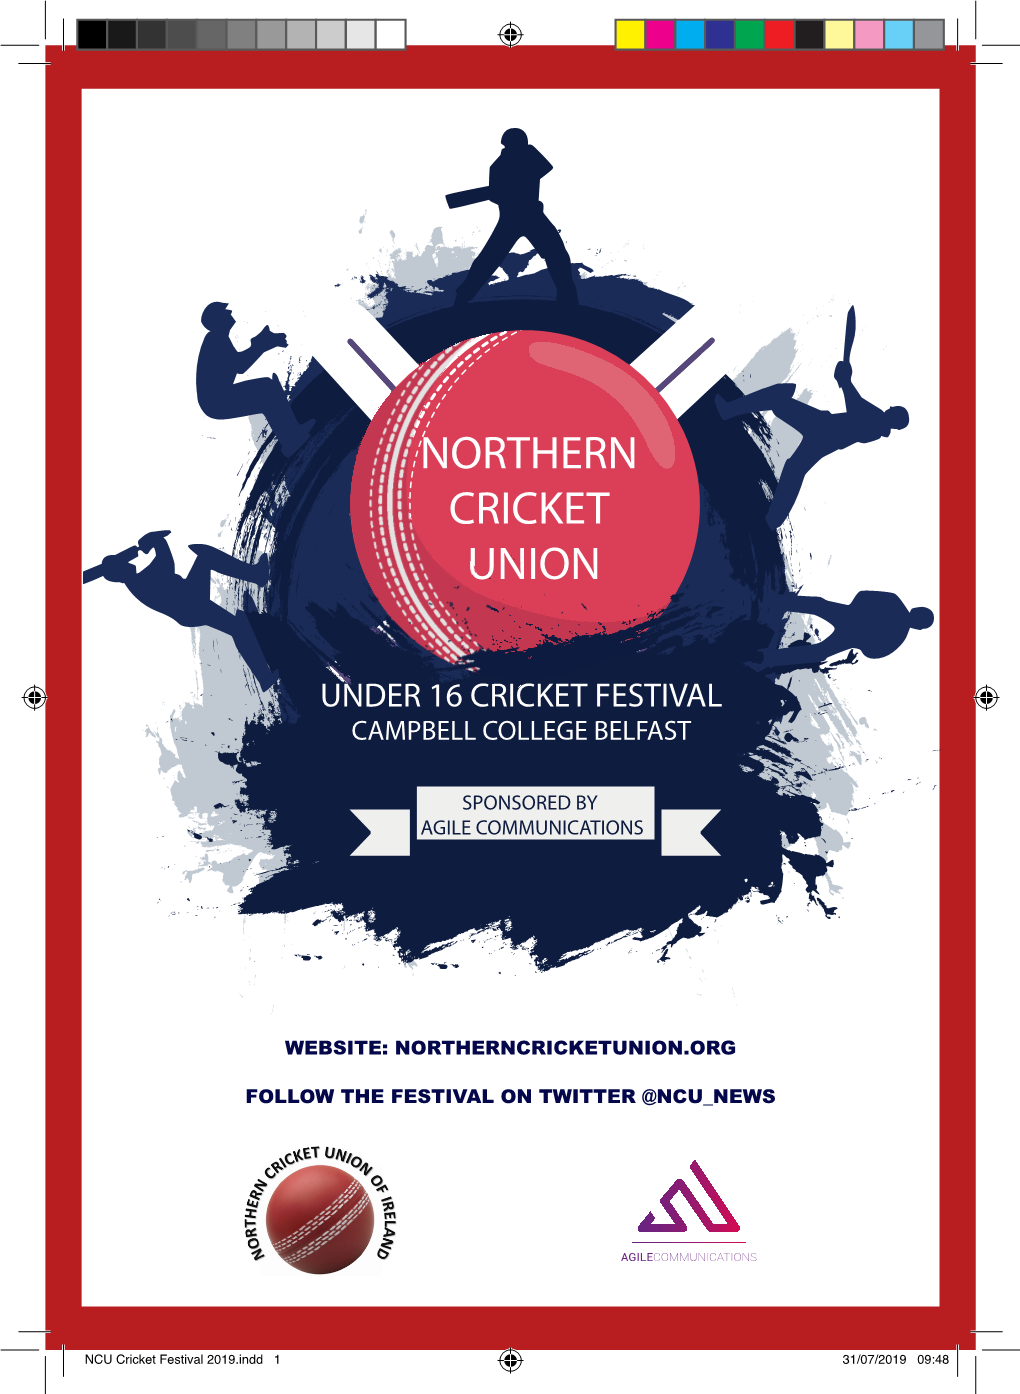 Download the NCU Cricket Festival 2019 Brochure by Clicking This Link